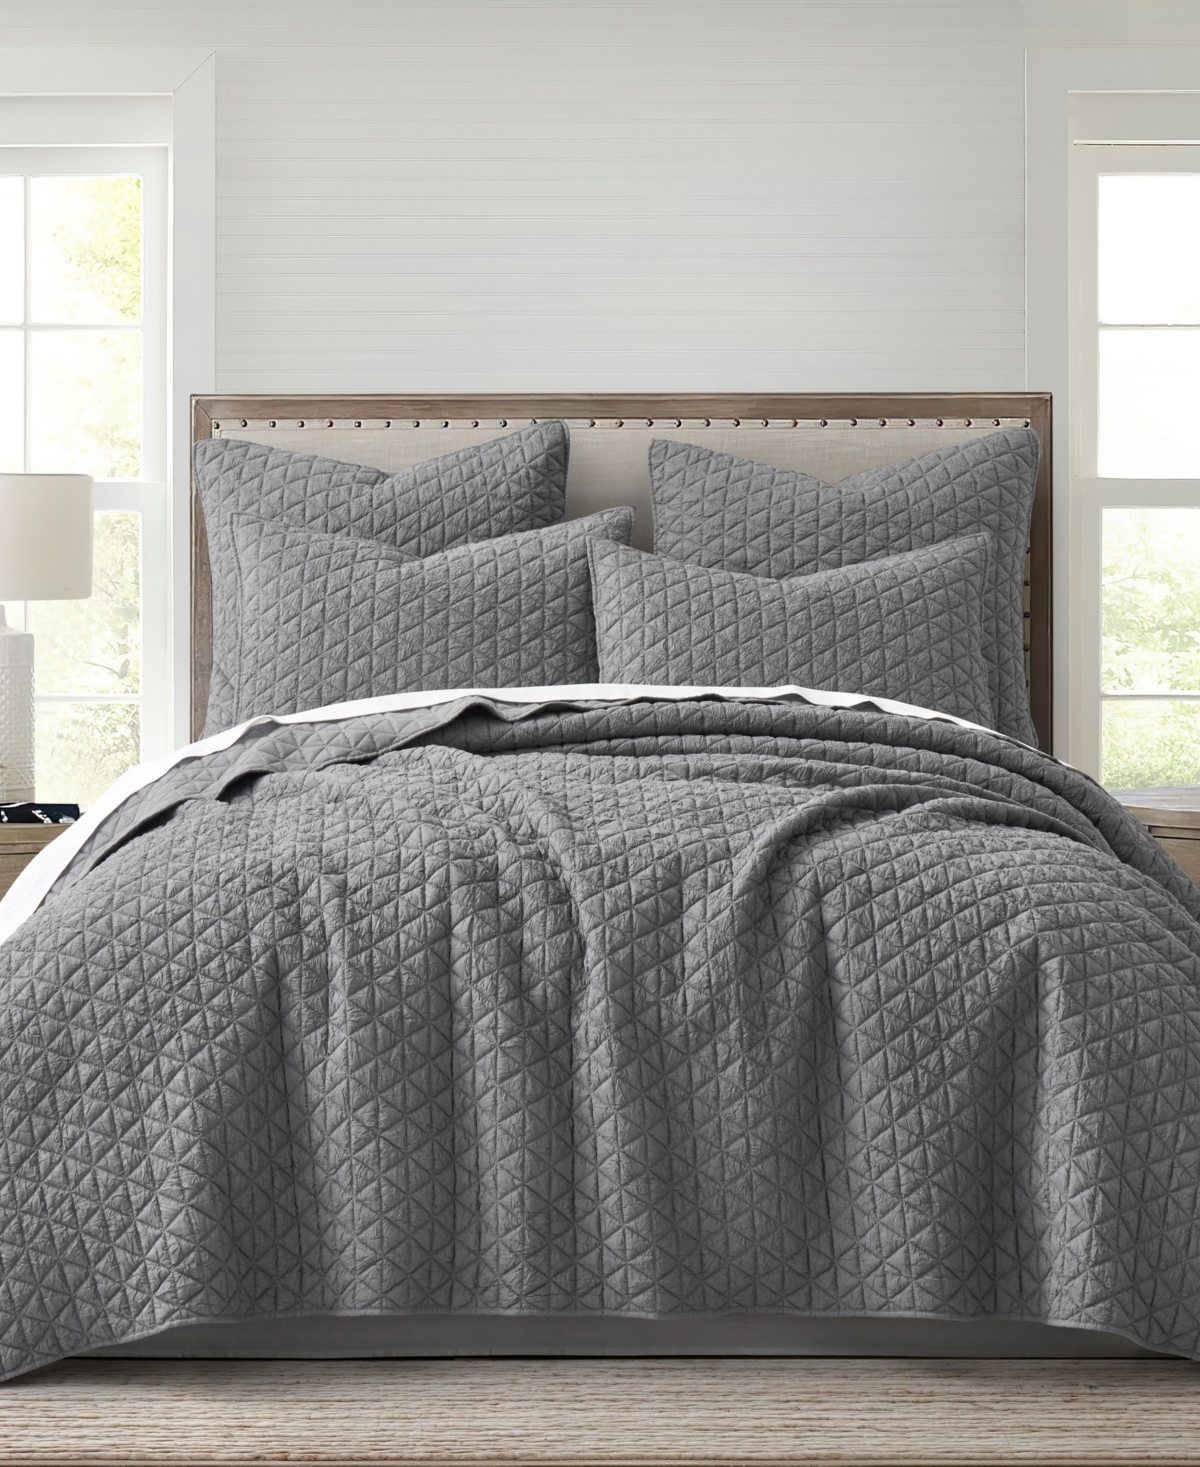 Levtex Homthreads Rowan Enzyme Wash 2-pc. Quilt Set, Twin/twin Xl In Gray